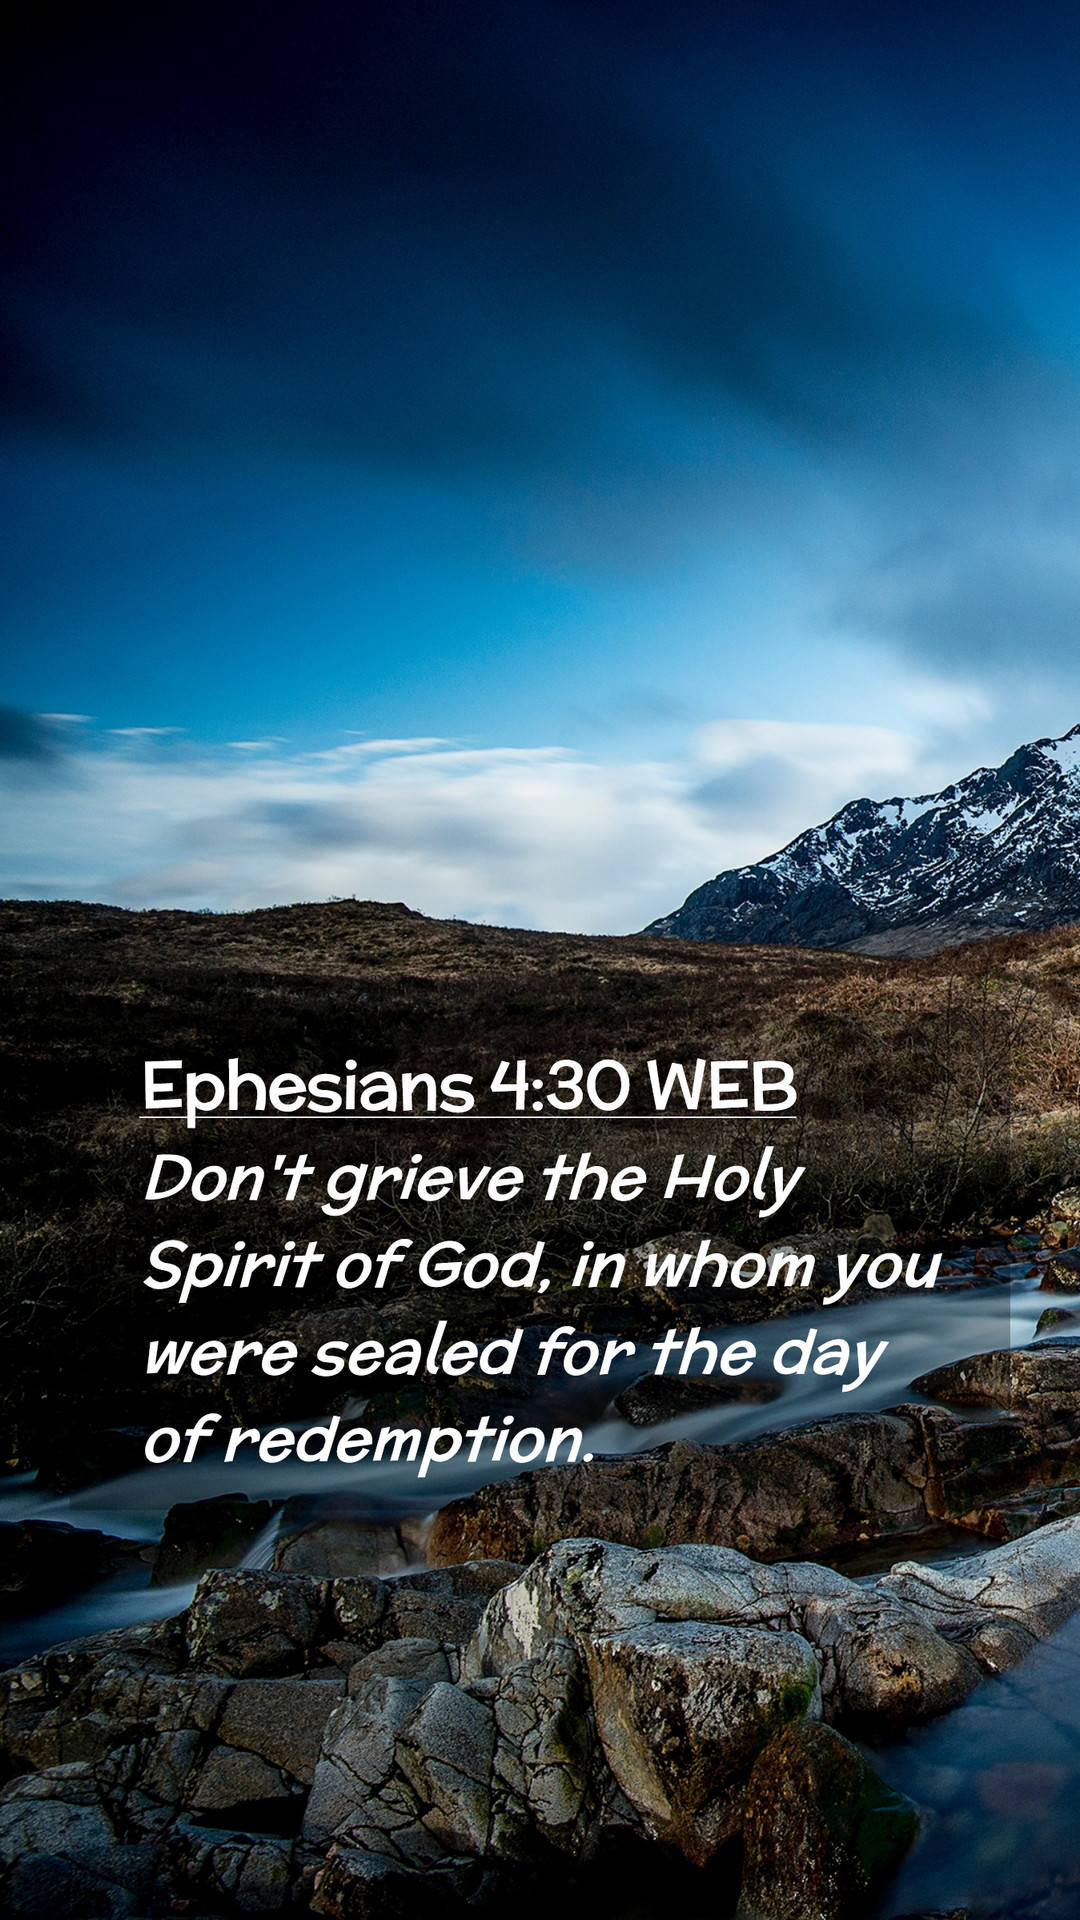 Ephesians 4:30 WEB Mobile Phone Wallpaper't grieve the Holy Spirit of God, in whom you